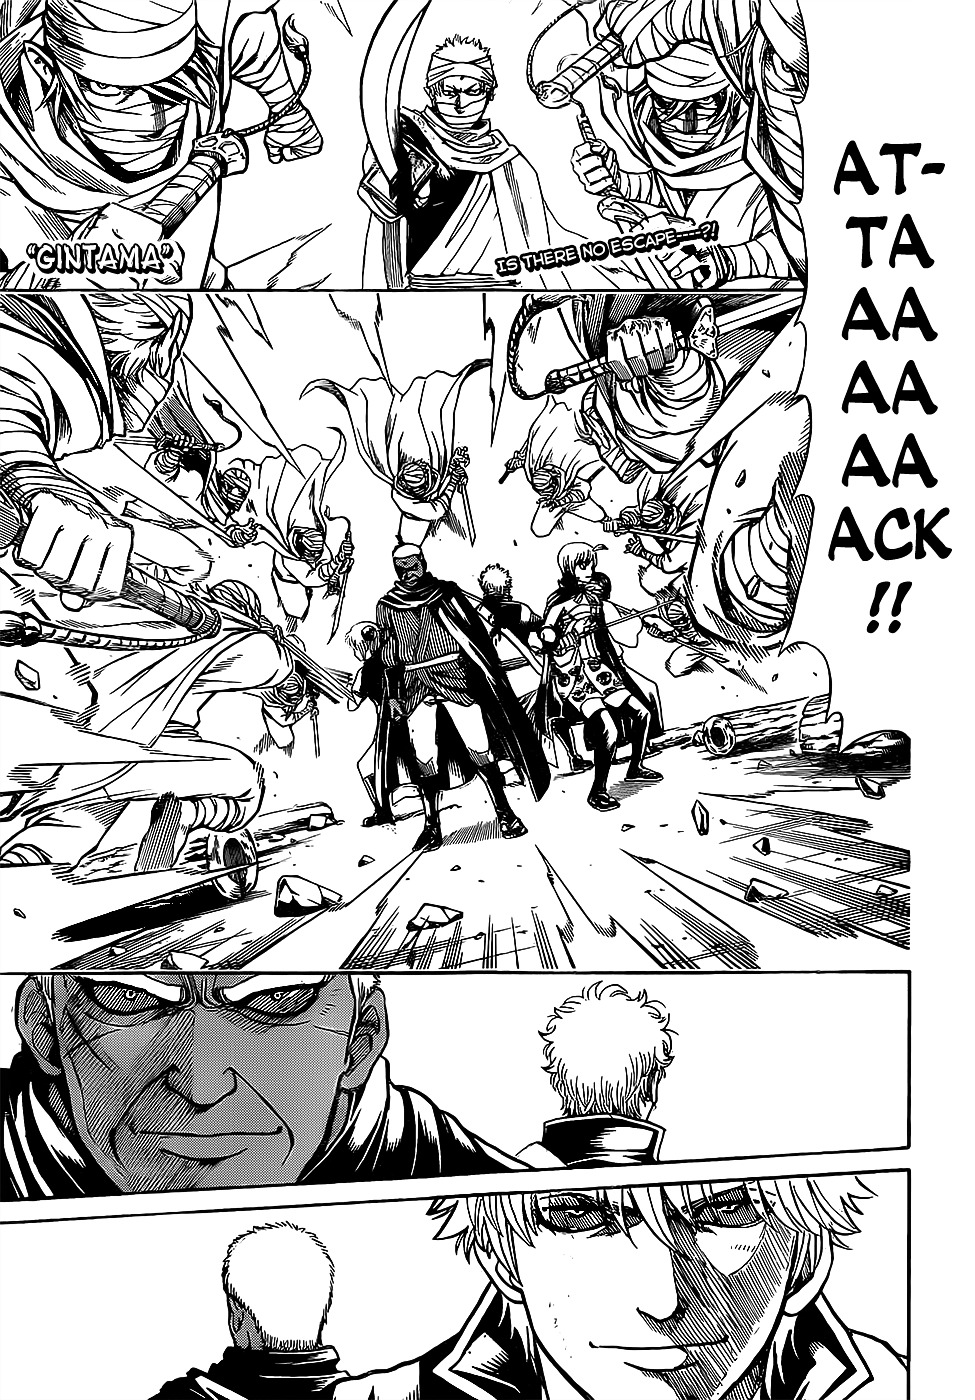 Gintama Vol.69 Chapter 623 V2 : When You Tell Old Stories Of Your Heroic Exploits, It Makes People D... - Picture 1